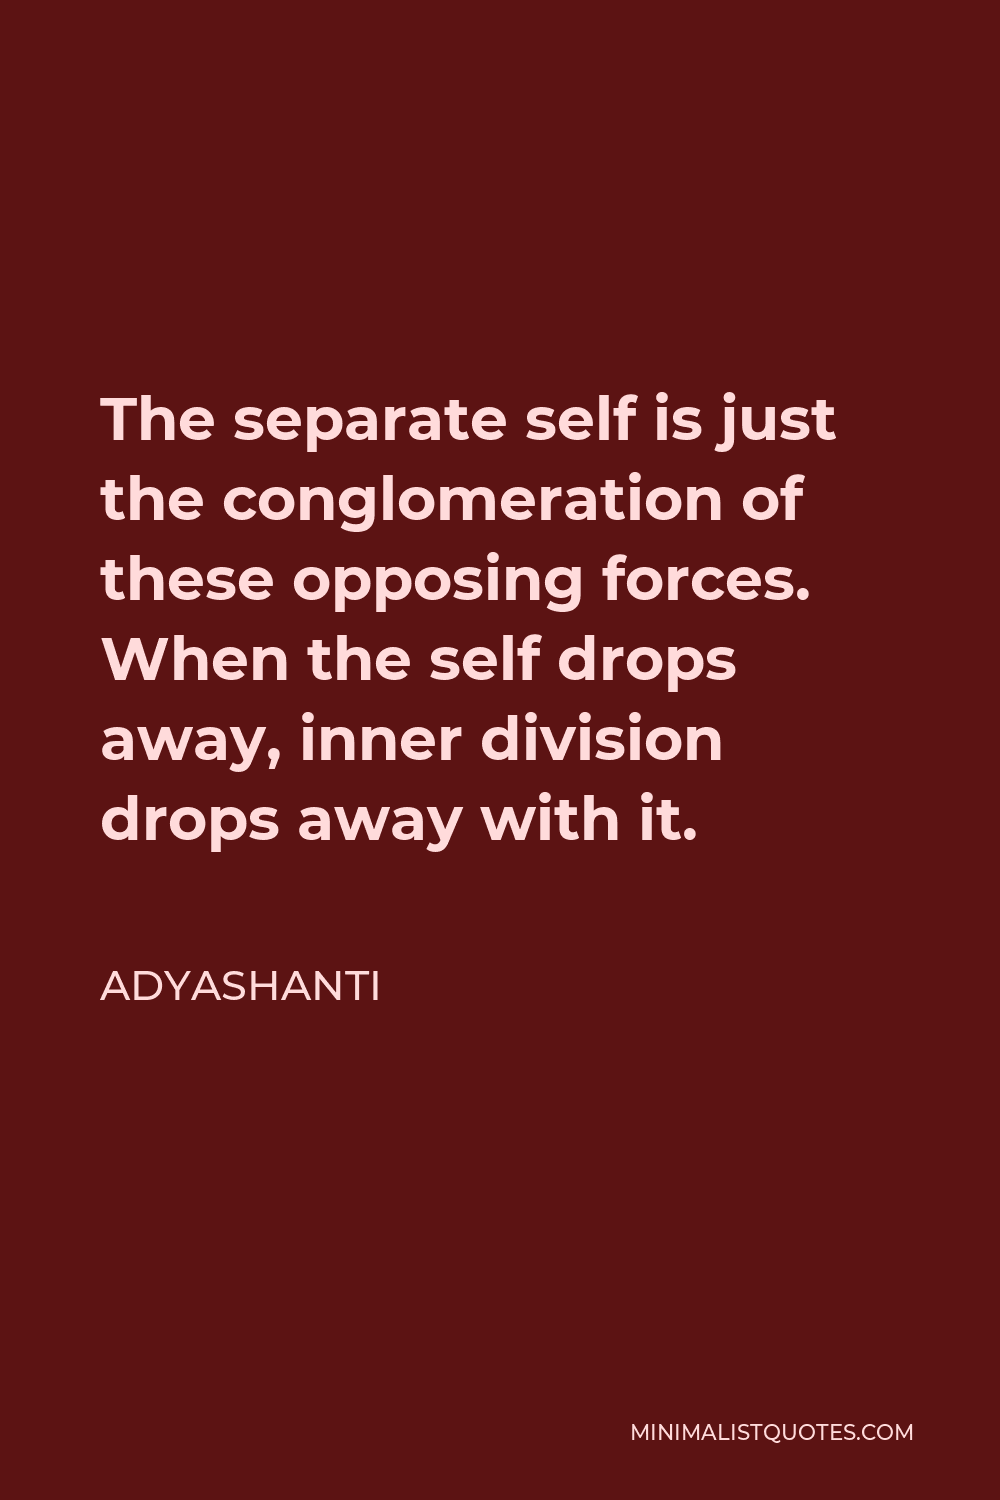 Adyashanti Quote - The separate self is just the conglomeration of these opposing forces. When the self drops away, inner division drops away with it.